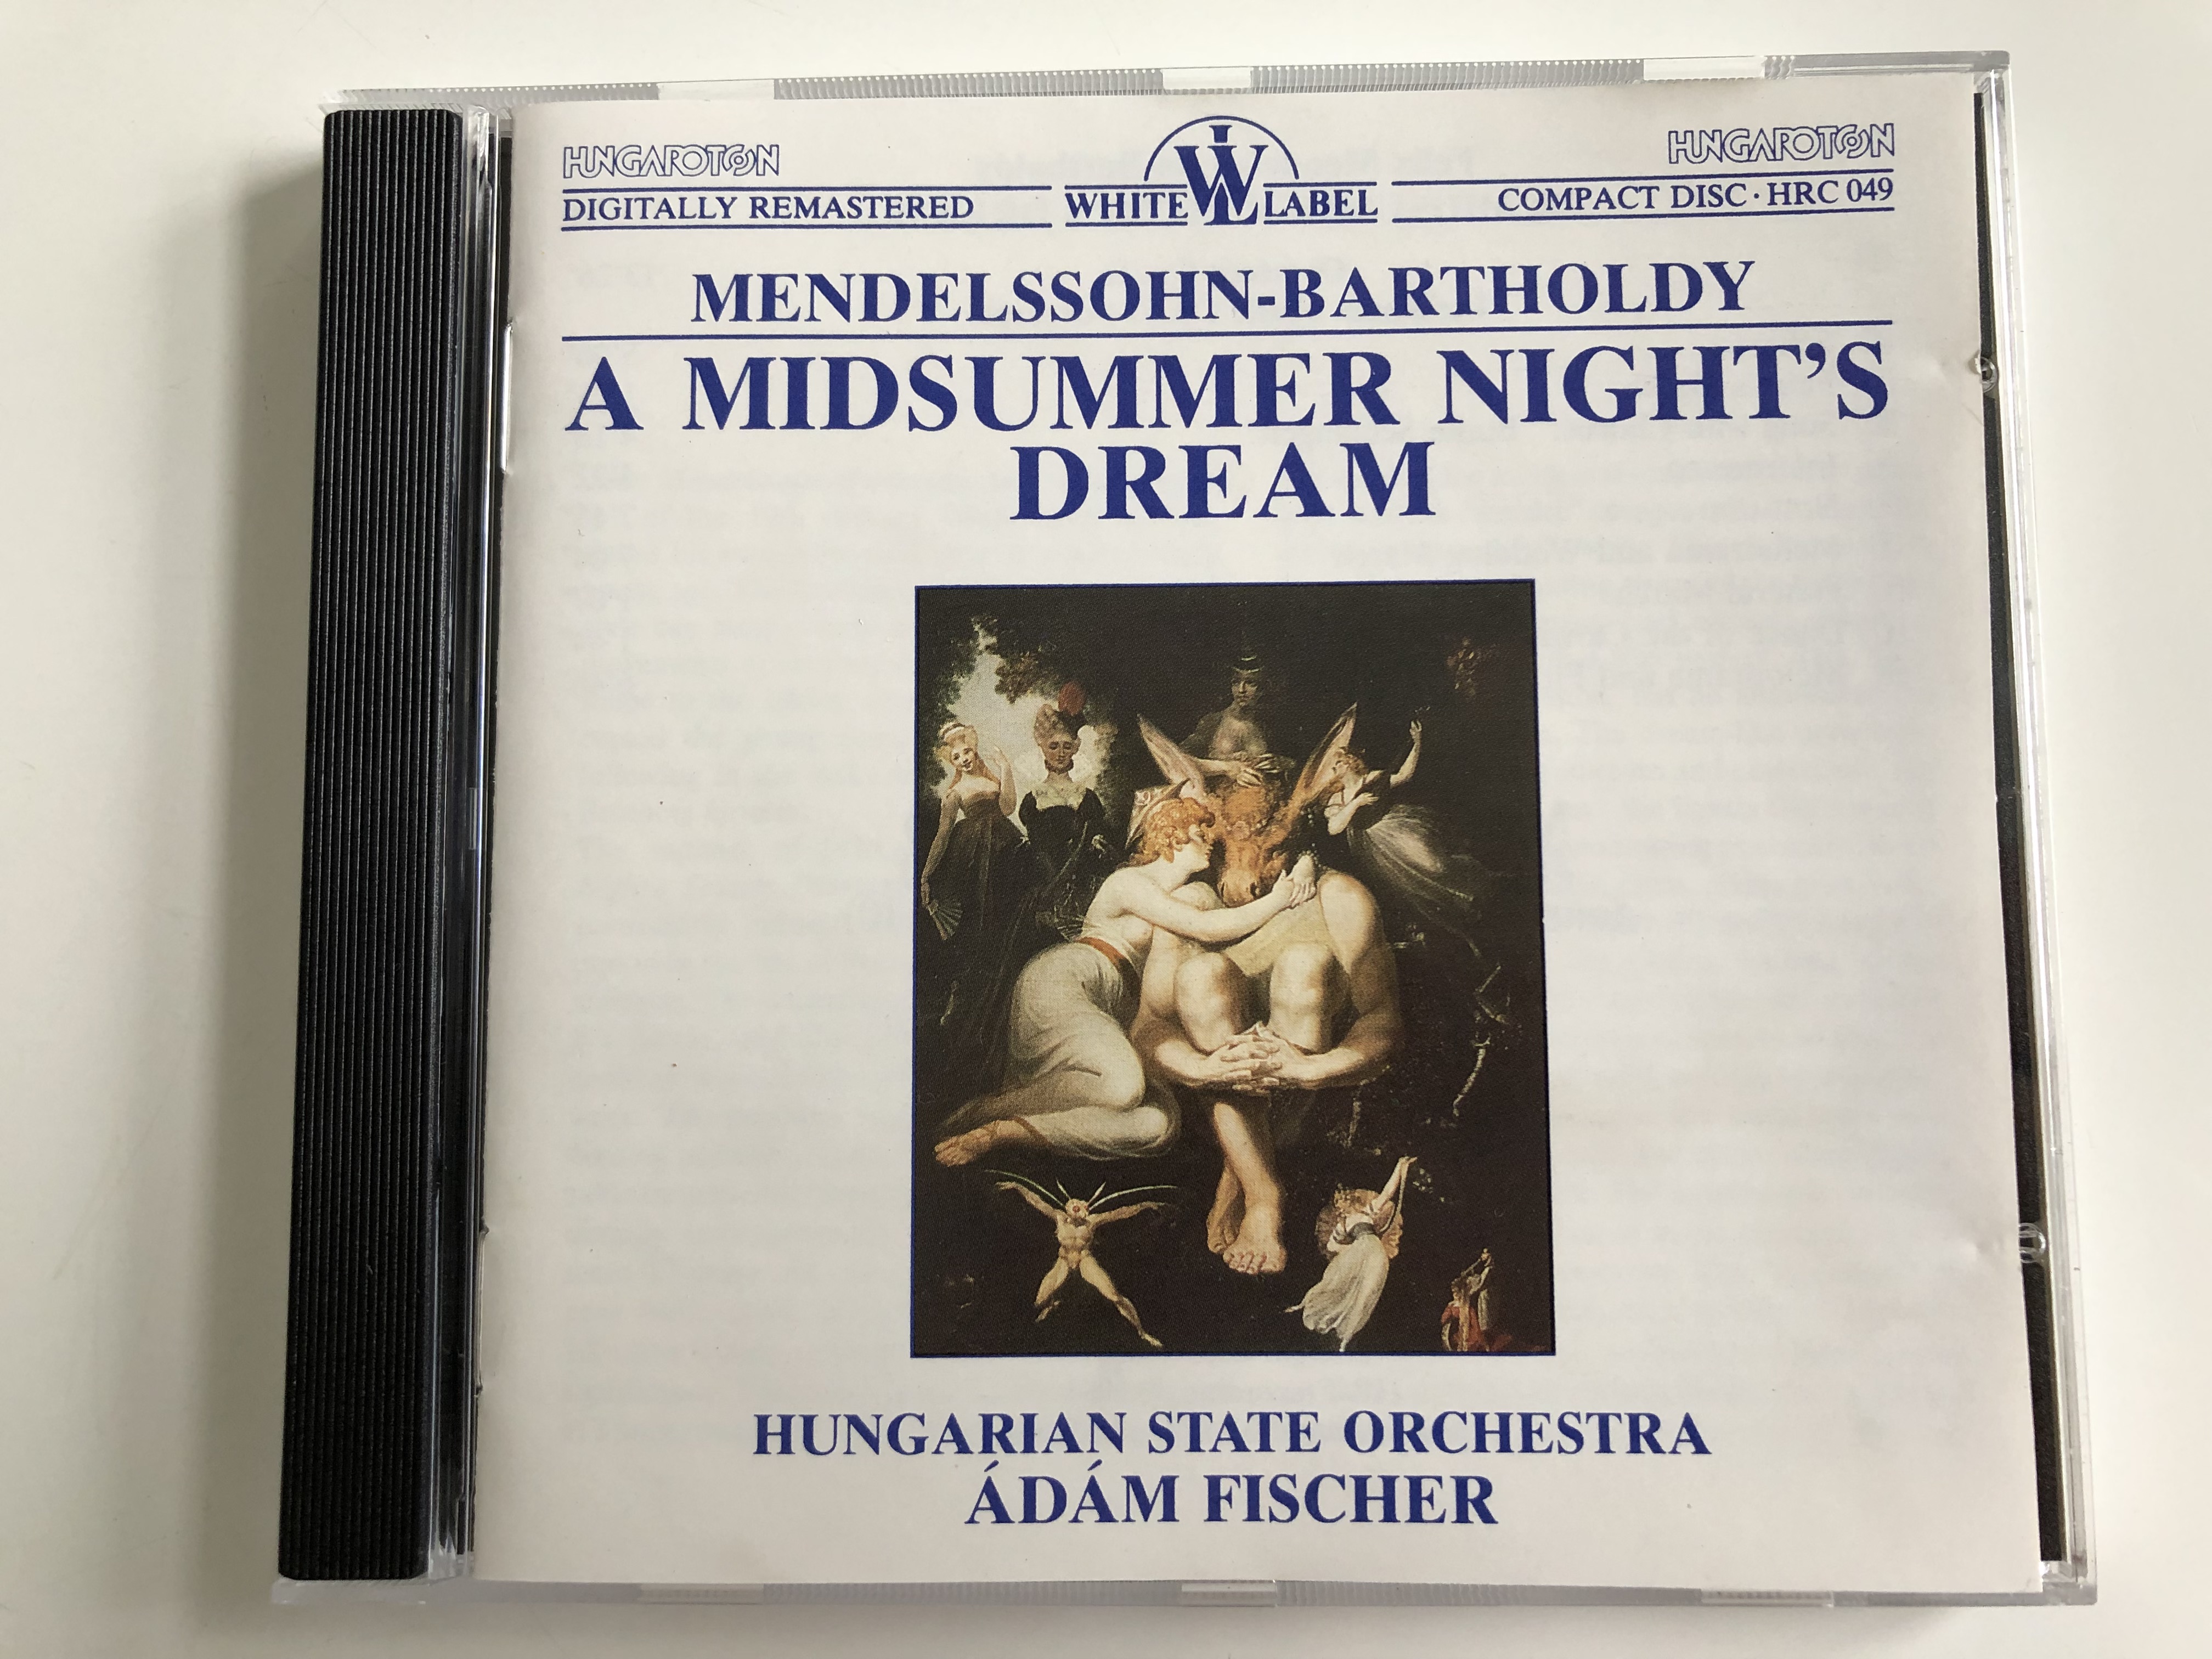 mendelssohn-bartholdy-a-midsummer-night-s-dream-hungarian-state-orchestra-conducted-d-m-fischer-hungaroton-audio-cd-1984-stereo-hrc-049-1-.jpg